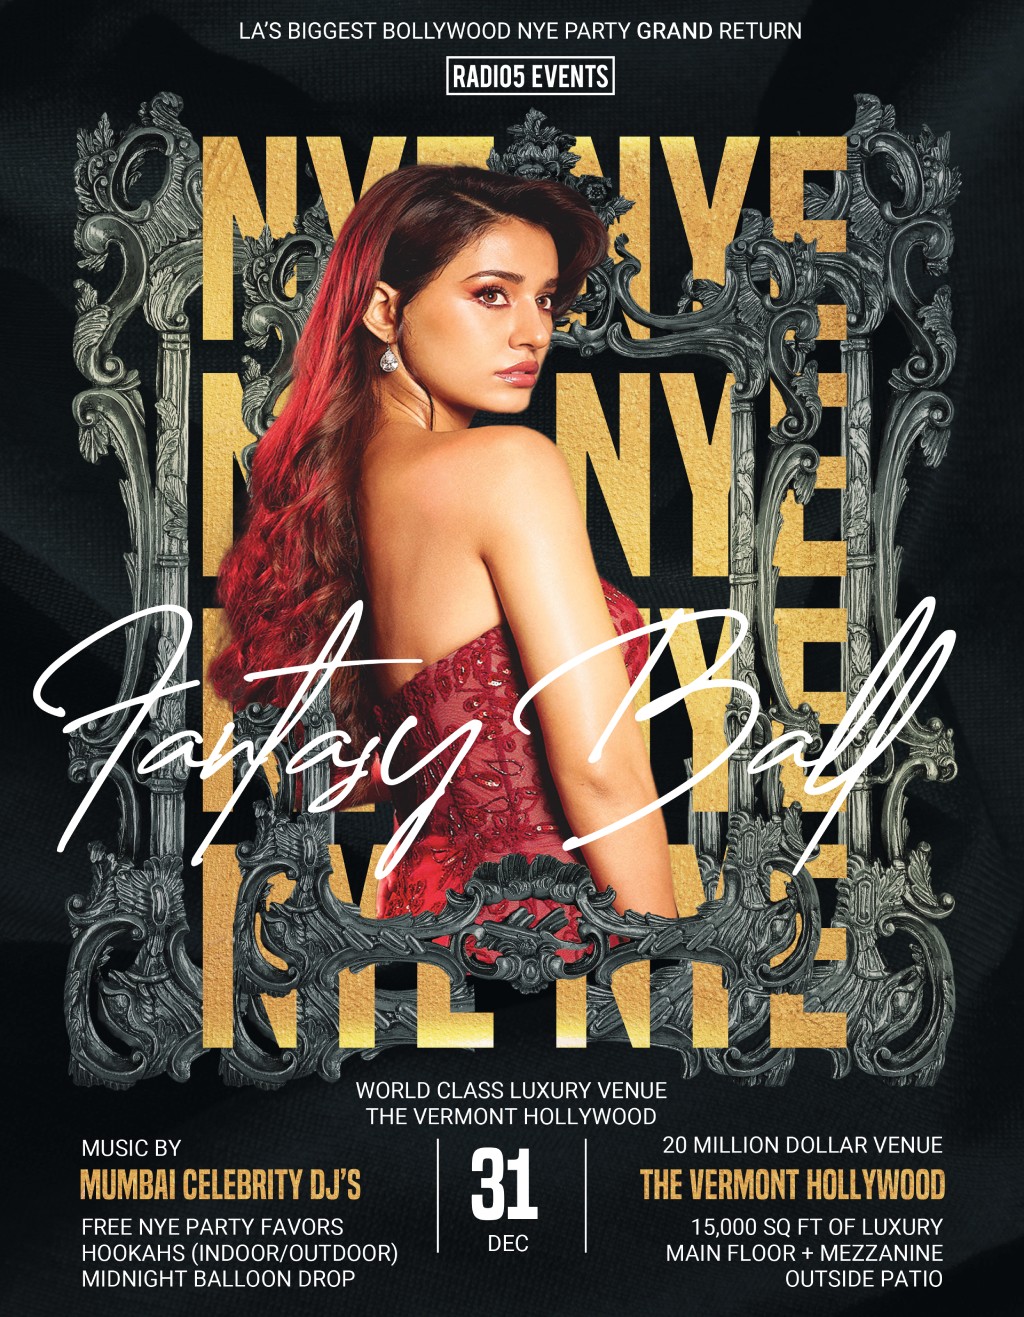 Radio5 Events presents the #1 Rated Desi NYE Party in LA! New Years Eve 2023 @ the Ultra Luxurious Vermont Hollywood for Fantasy Ball! Celebrate New Years with Charm & Sophistication w/ Mumbai's #1 DJ's. Free Party Favors & More!